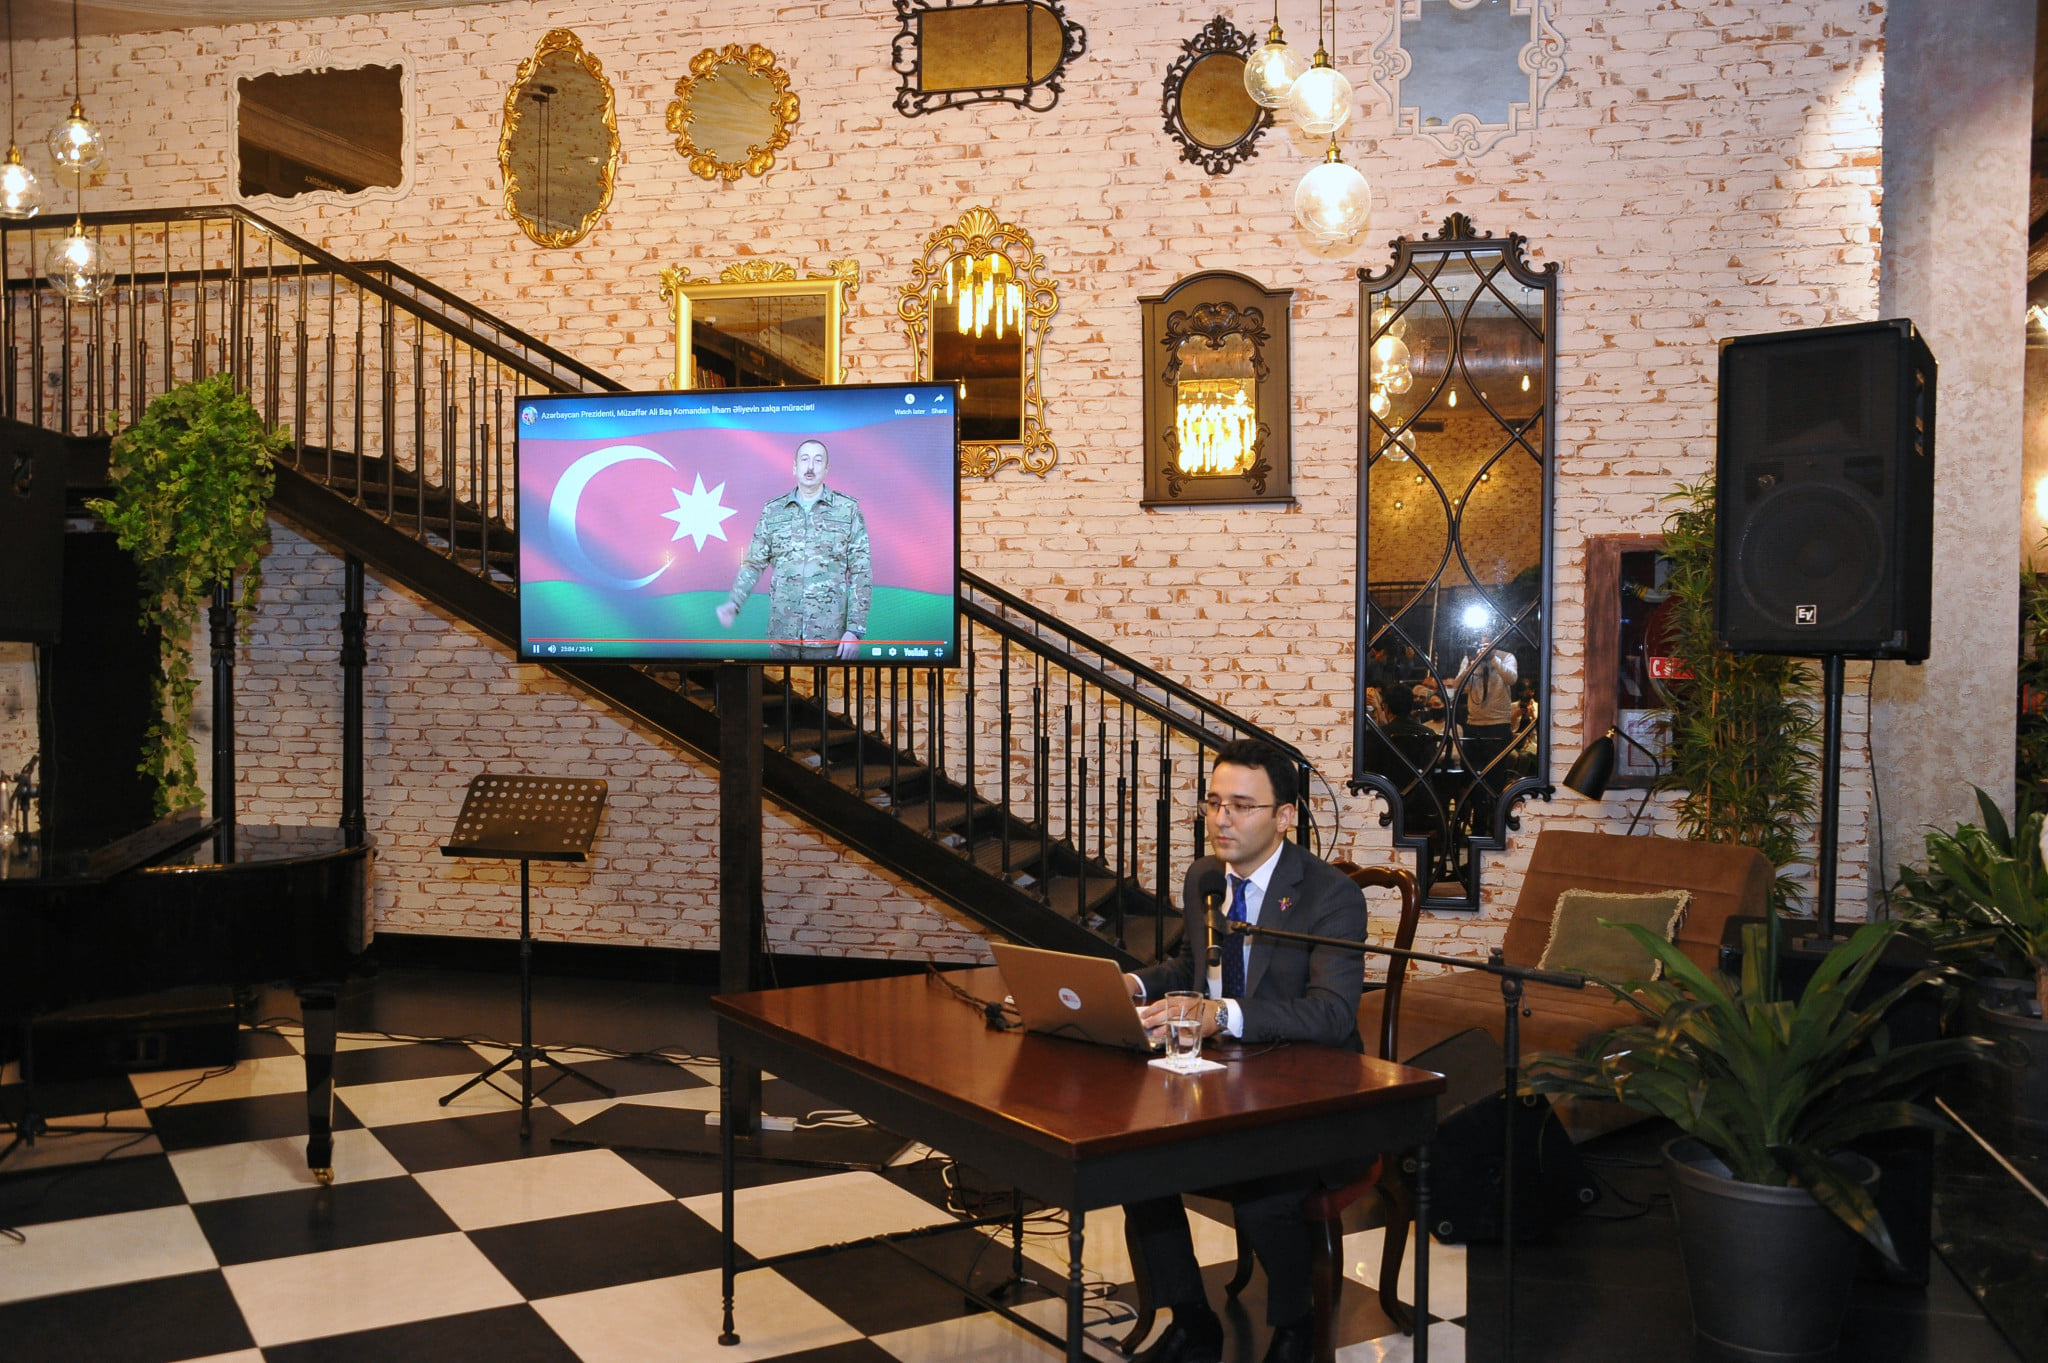 Baku Book Center unveils www.shusha.today website and marks Victory Day